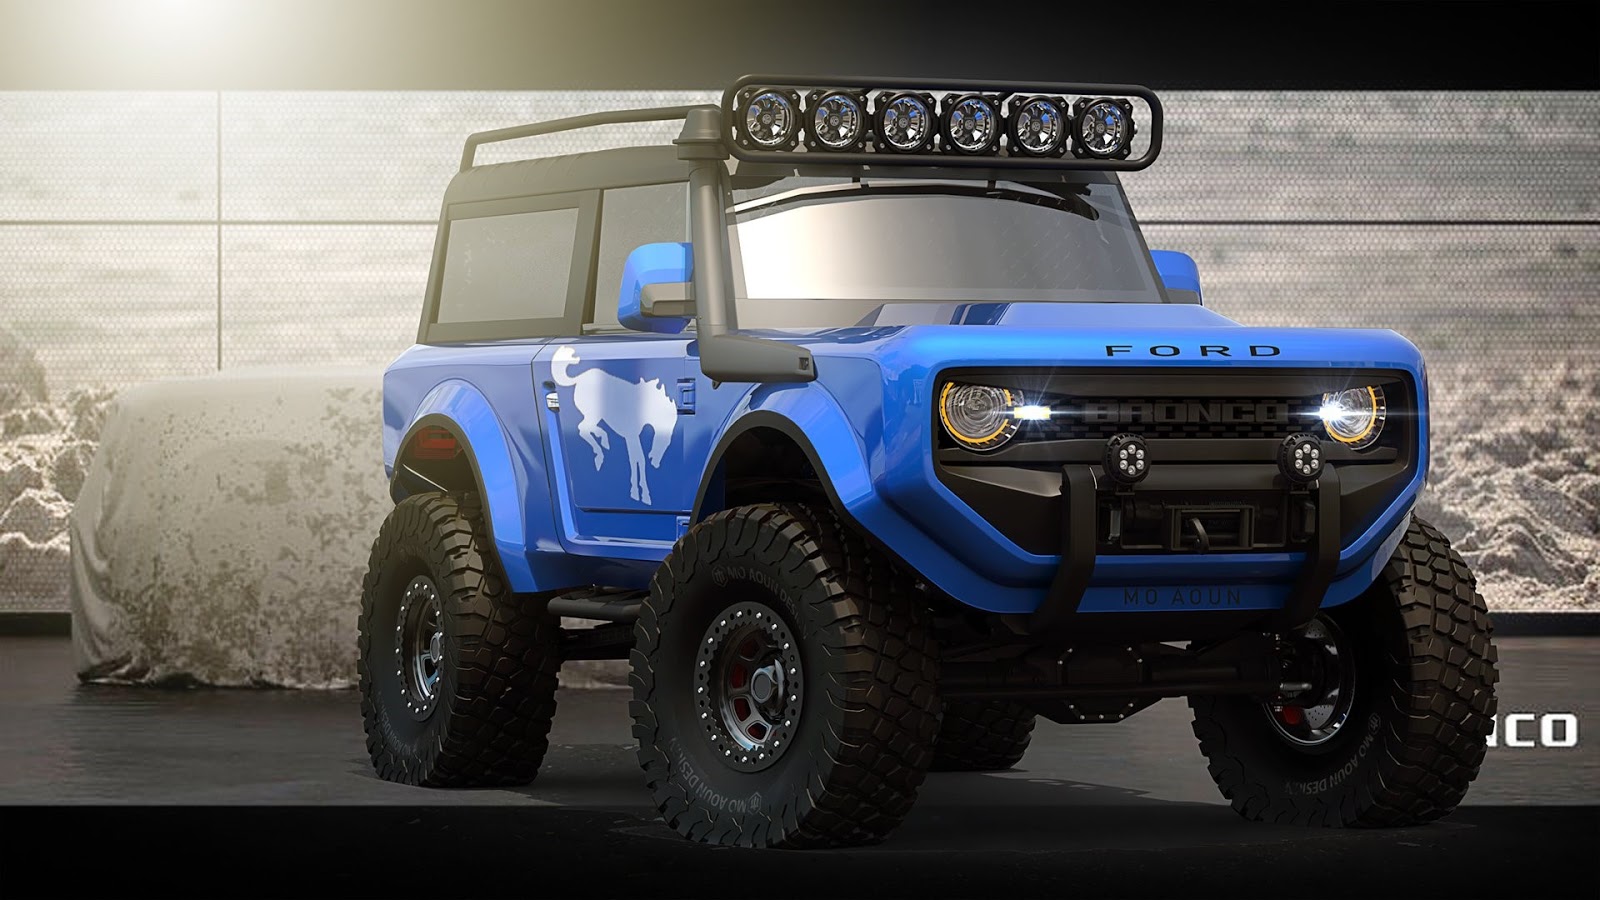 Ford Bronco What's your favorite render so far? 58A4BAAB-3912-4FAE-8736-AA82FDE8E22C